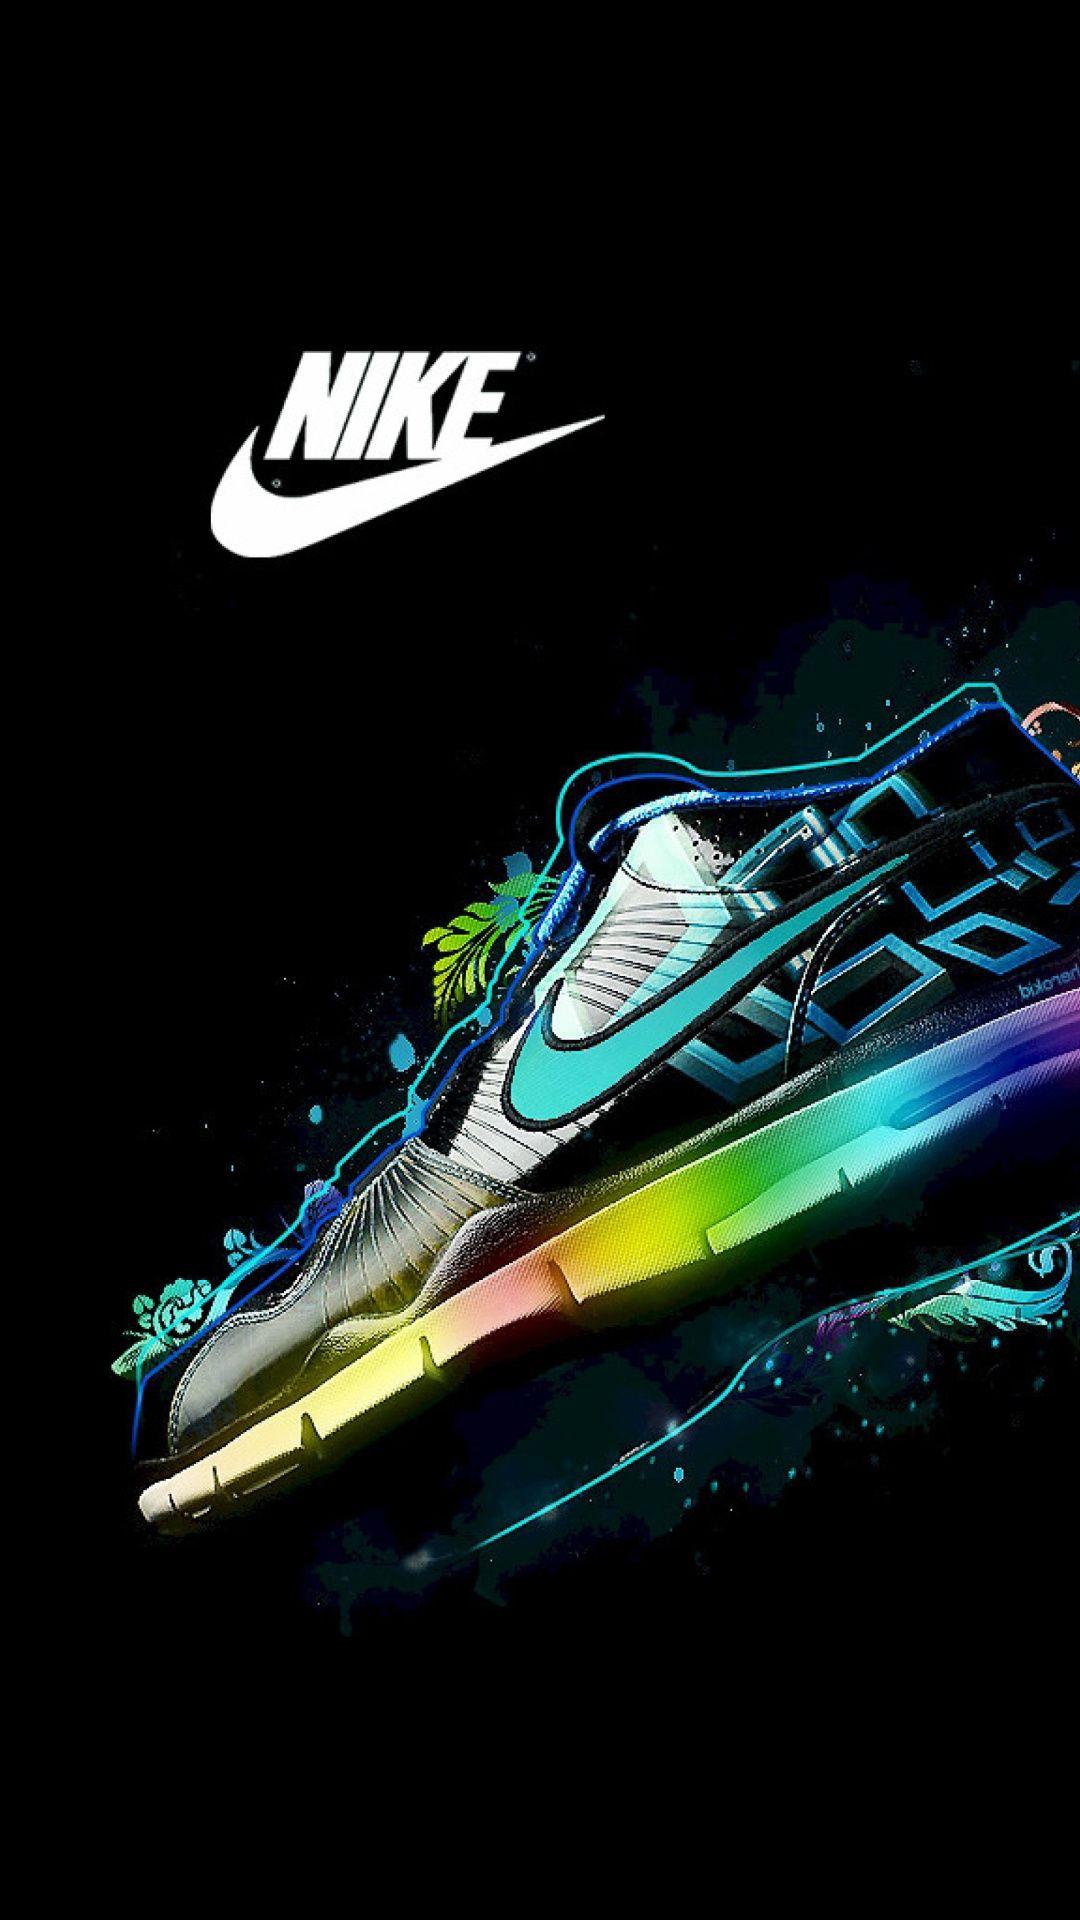 Nike logo and nike air shoes iphone mobile photo